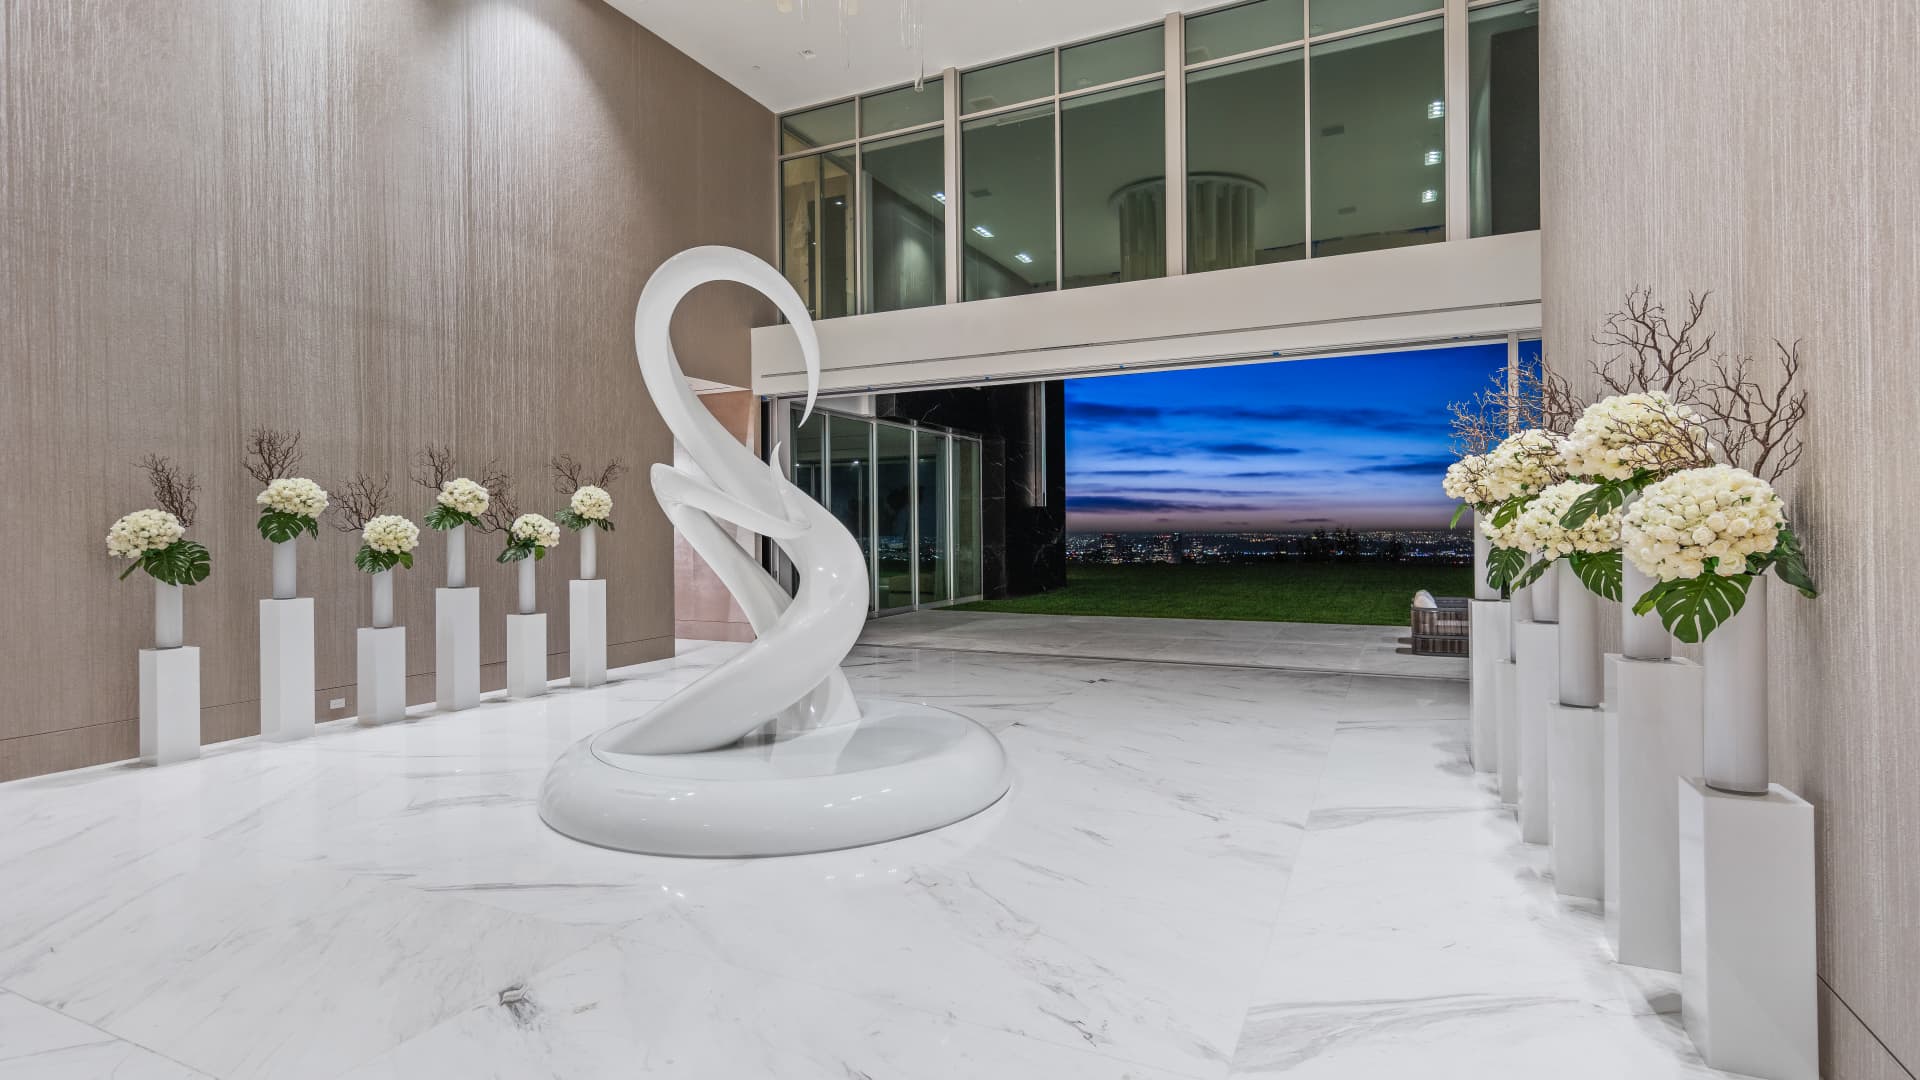 The mansion's foyer includes 25-foot ceilings, a large serpent-like sculpture and panoramic views of downtown LA.